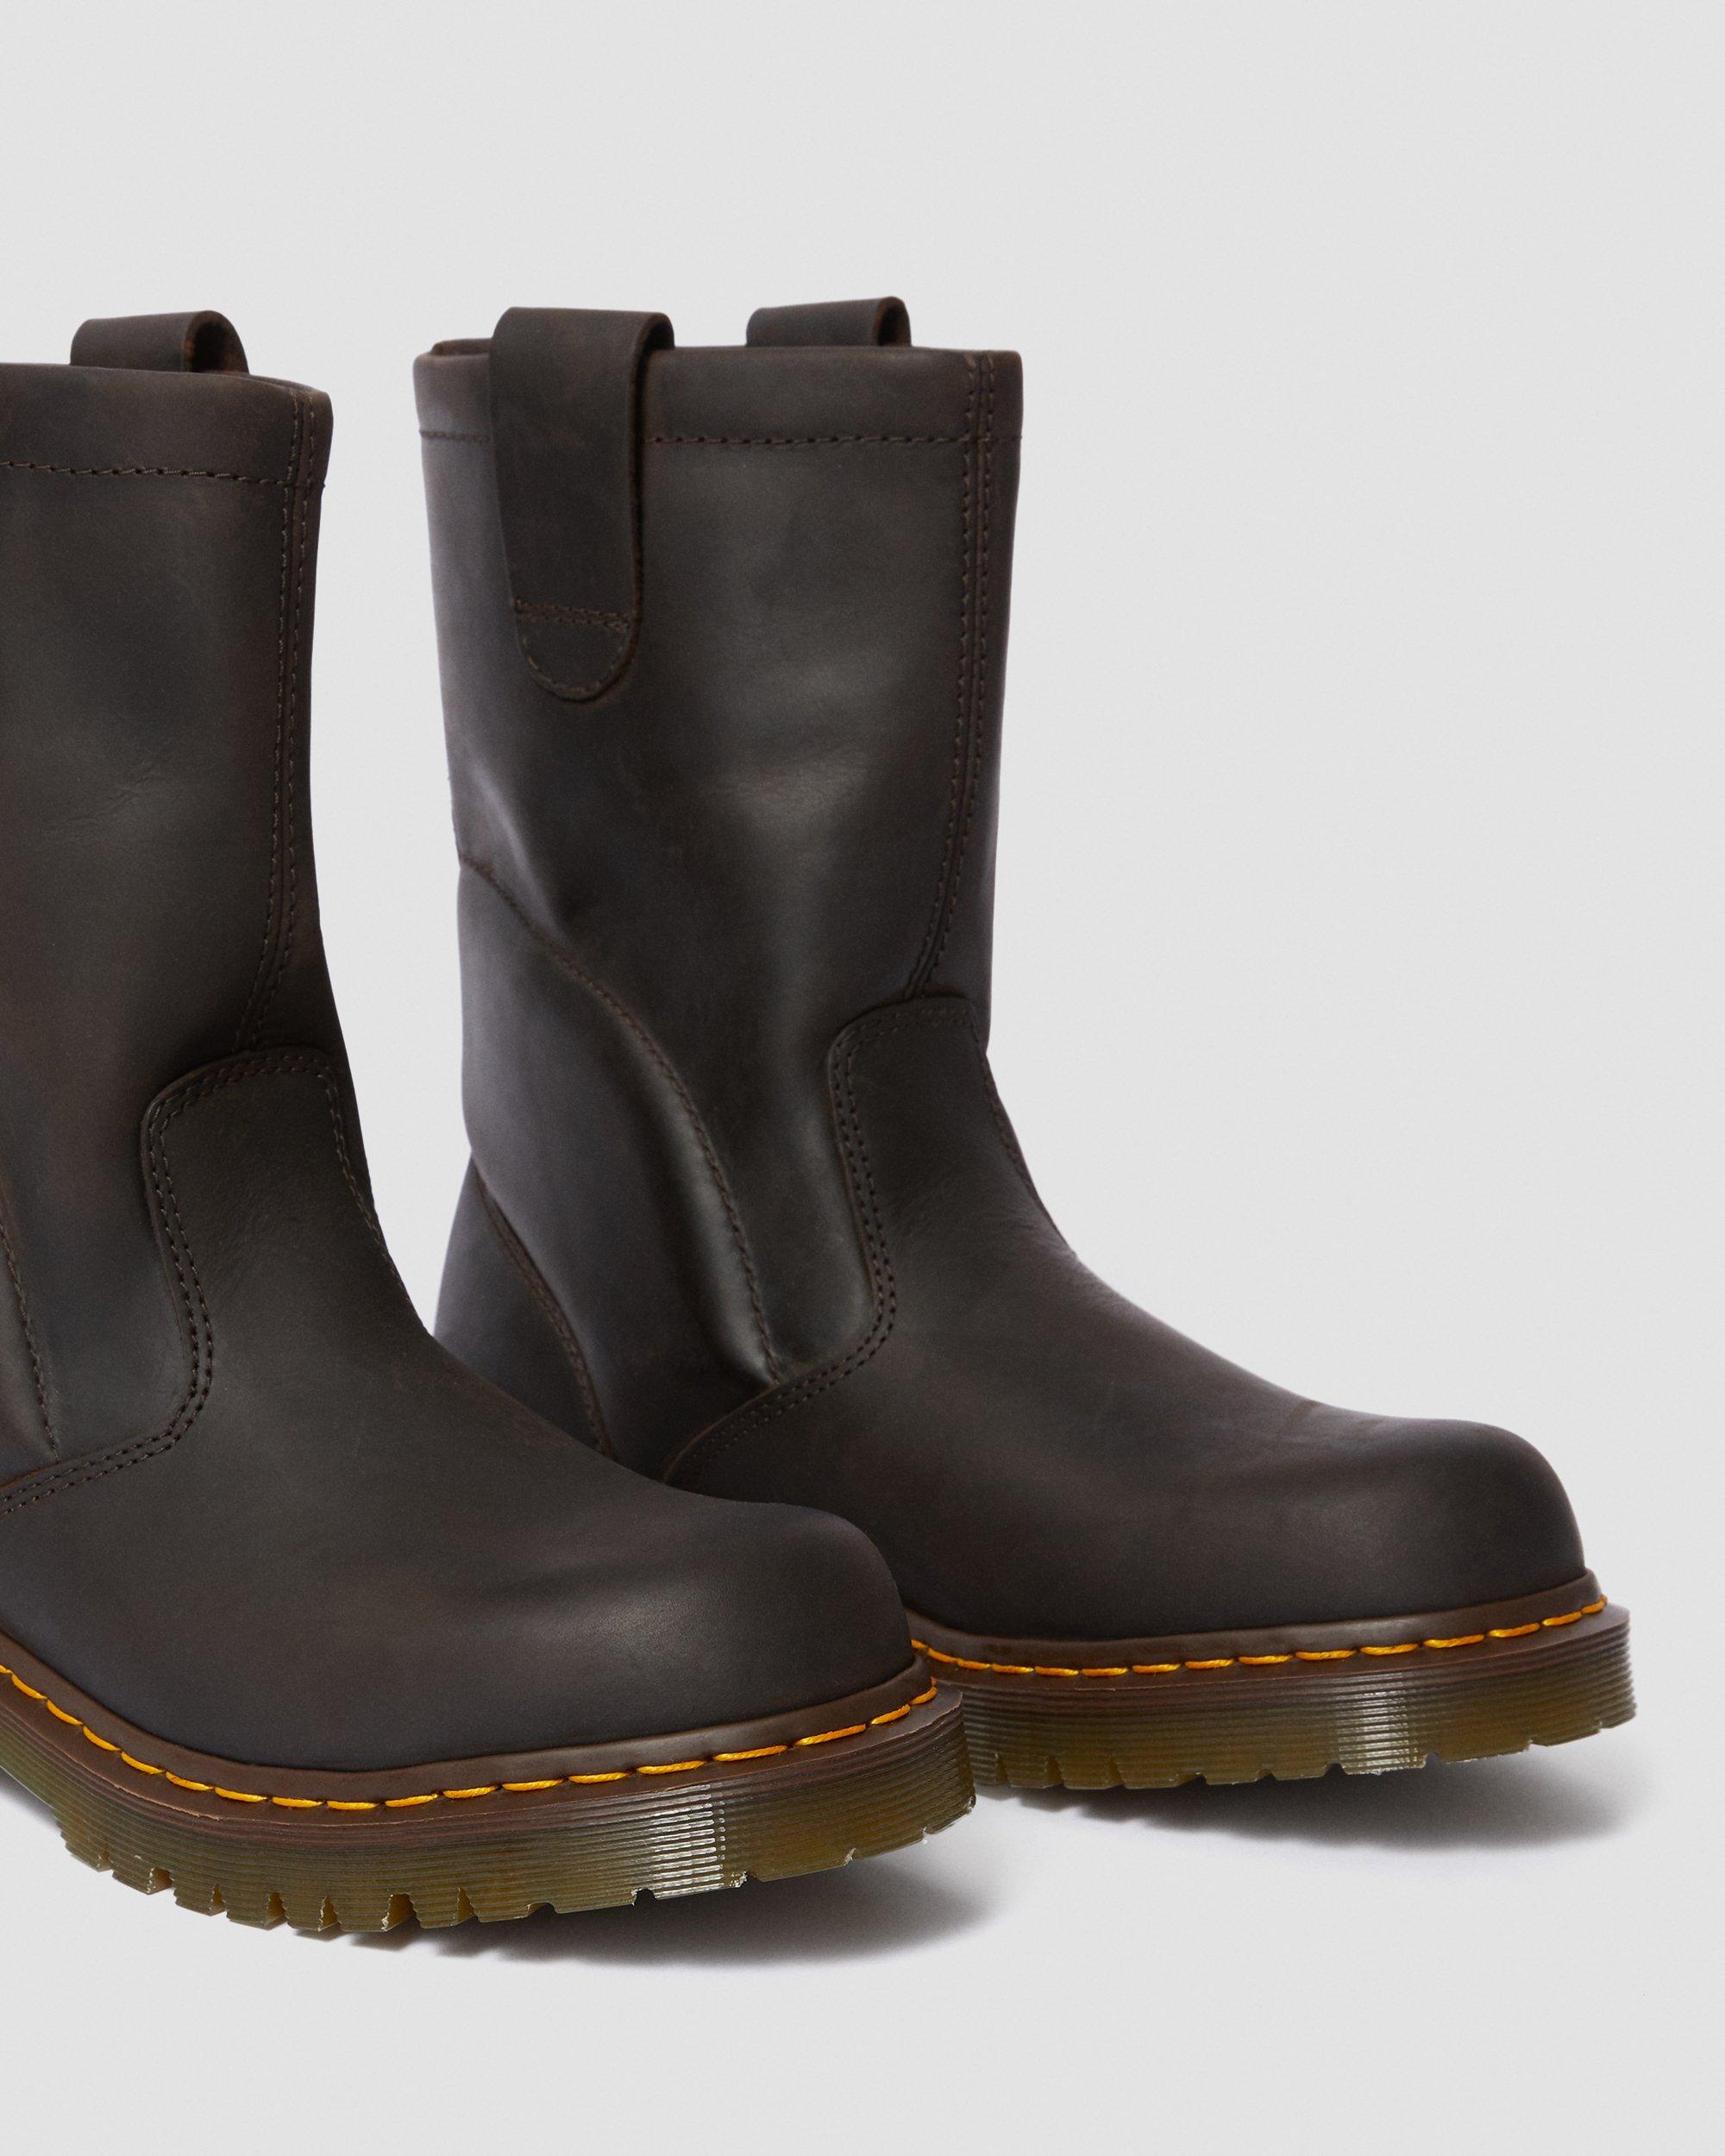 Icon 2296 Tall Work Boots in Dark Brown | Dr. Martens